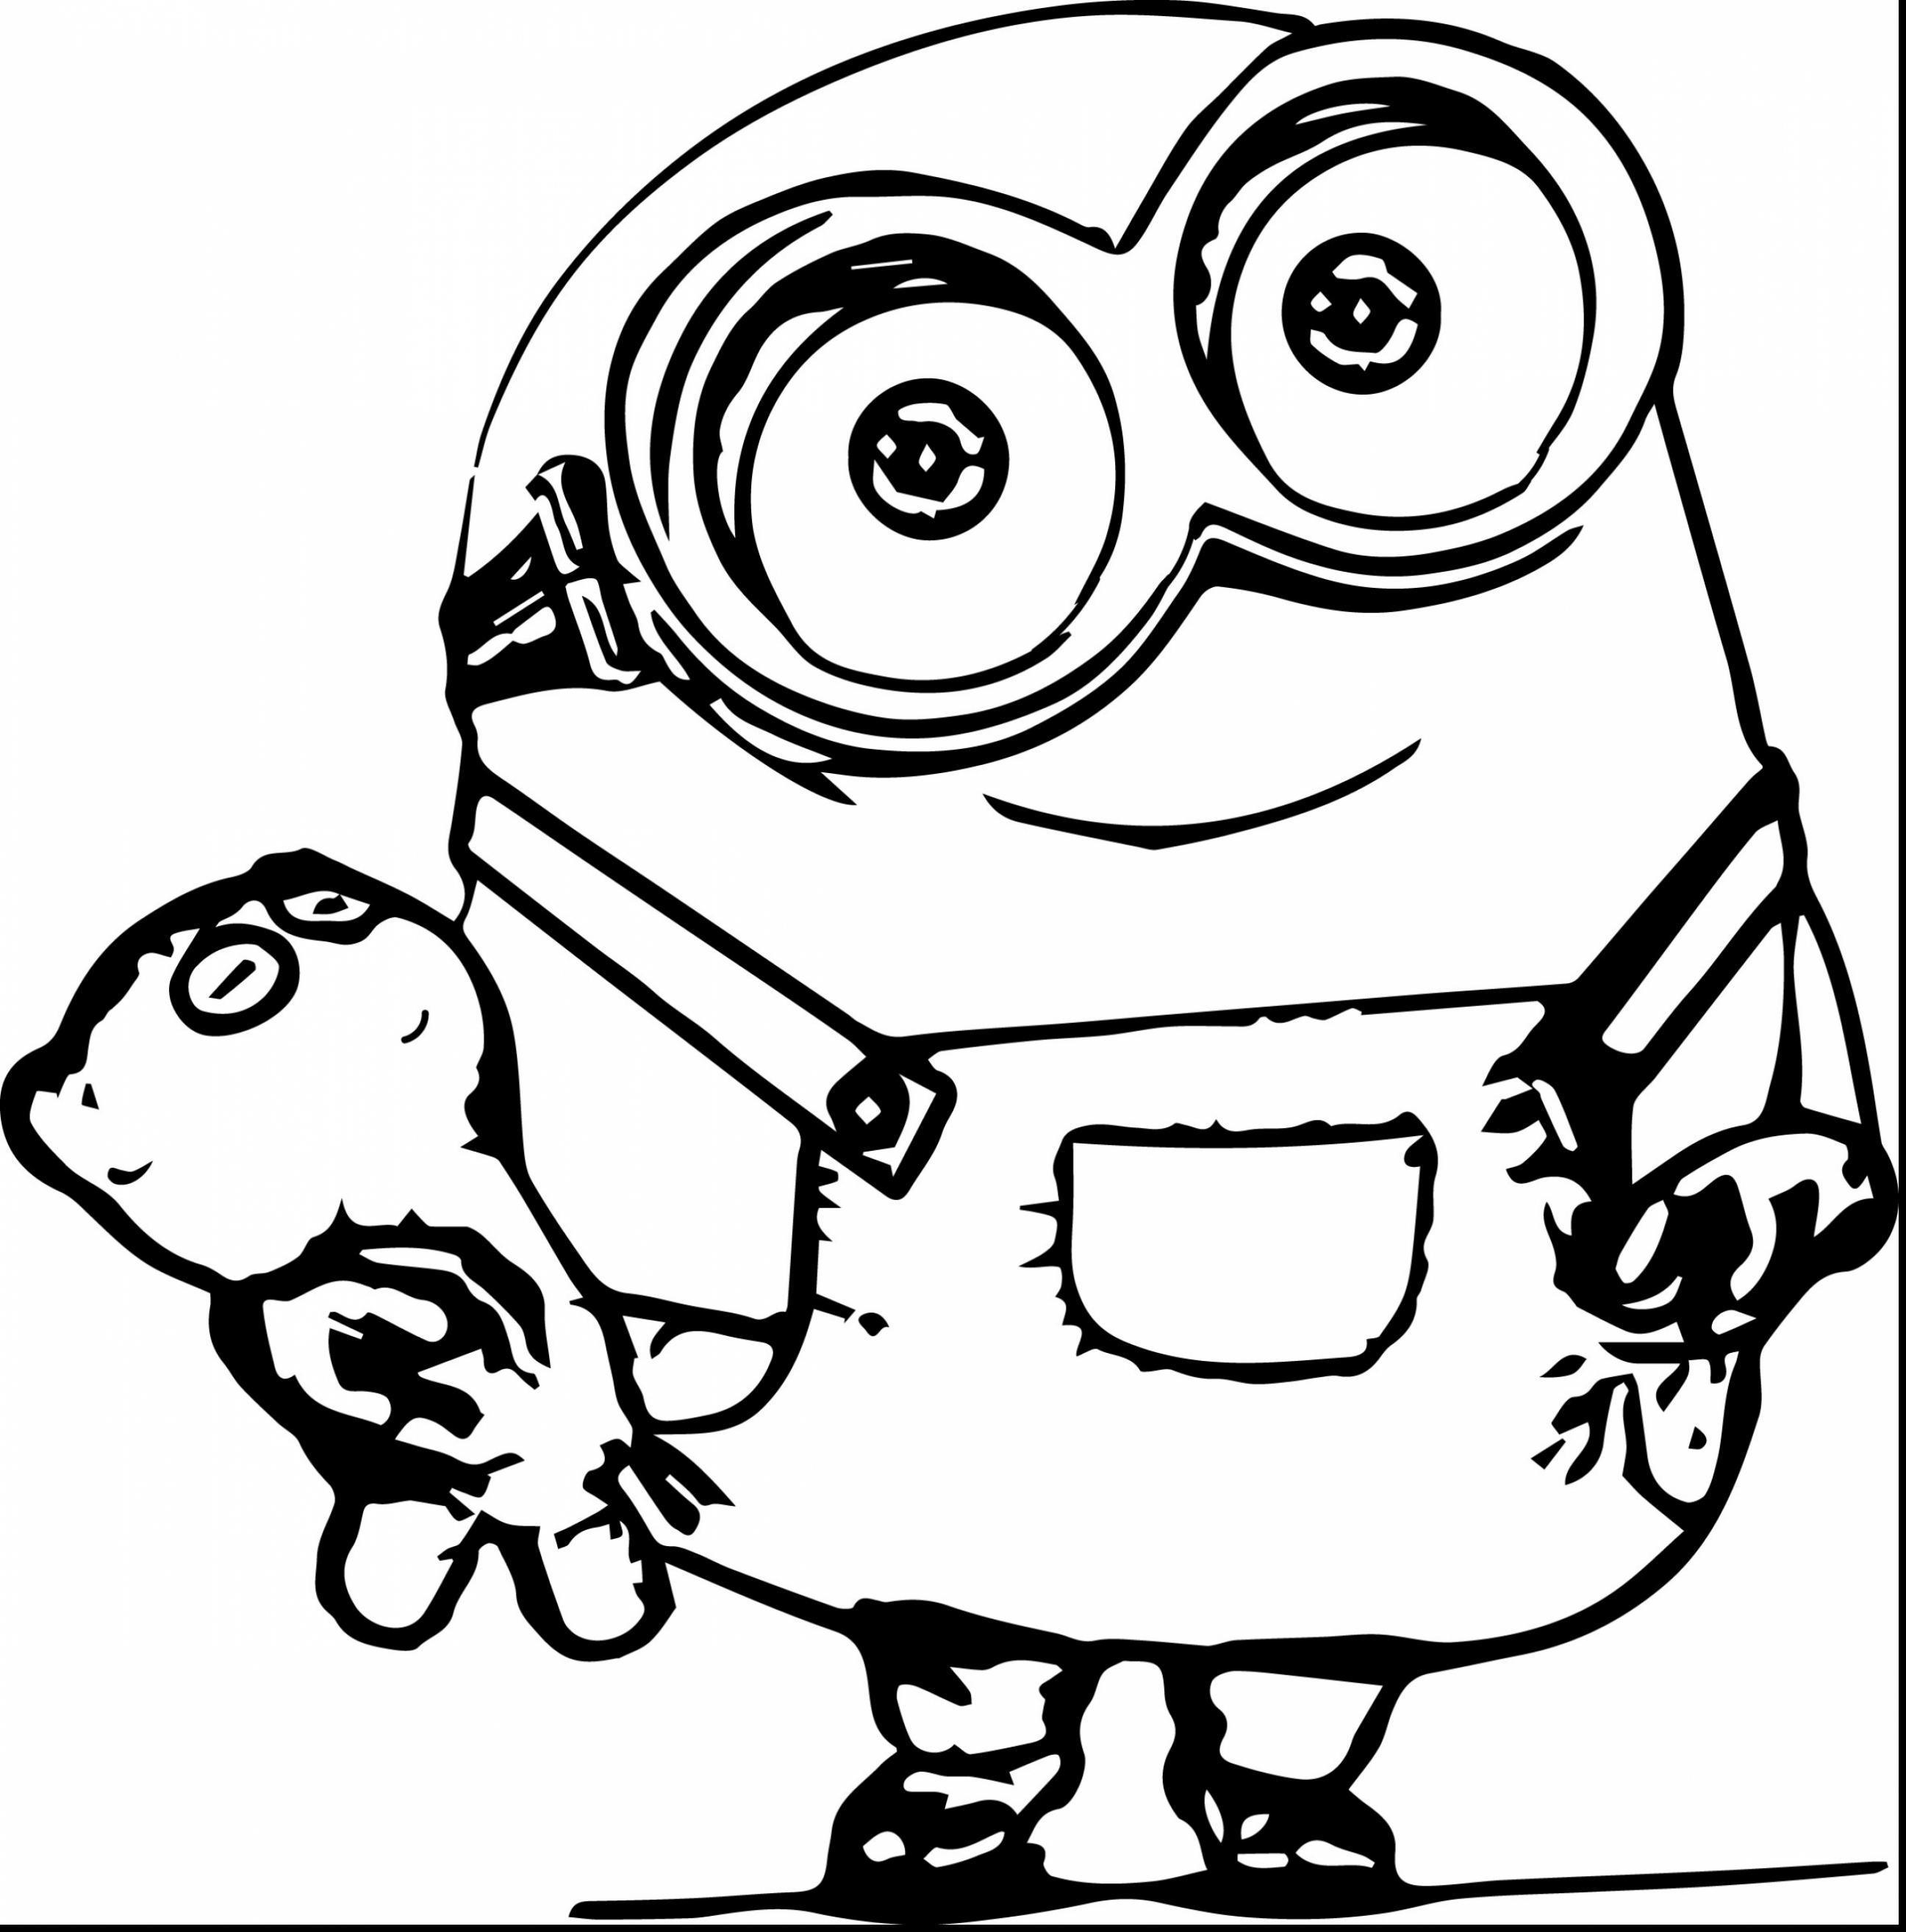 Minion Drawing Template at GetDrawings Free download